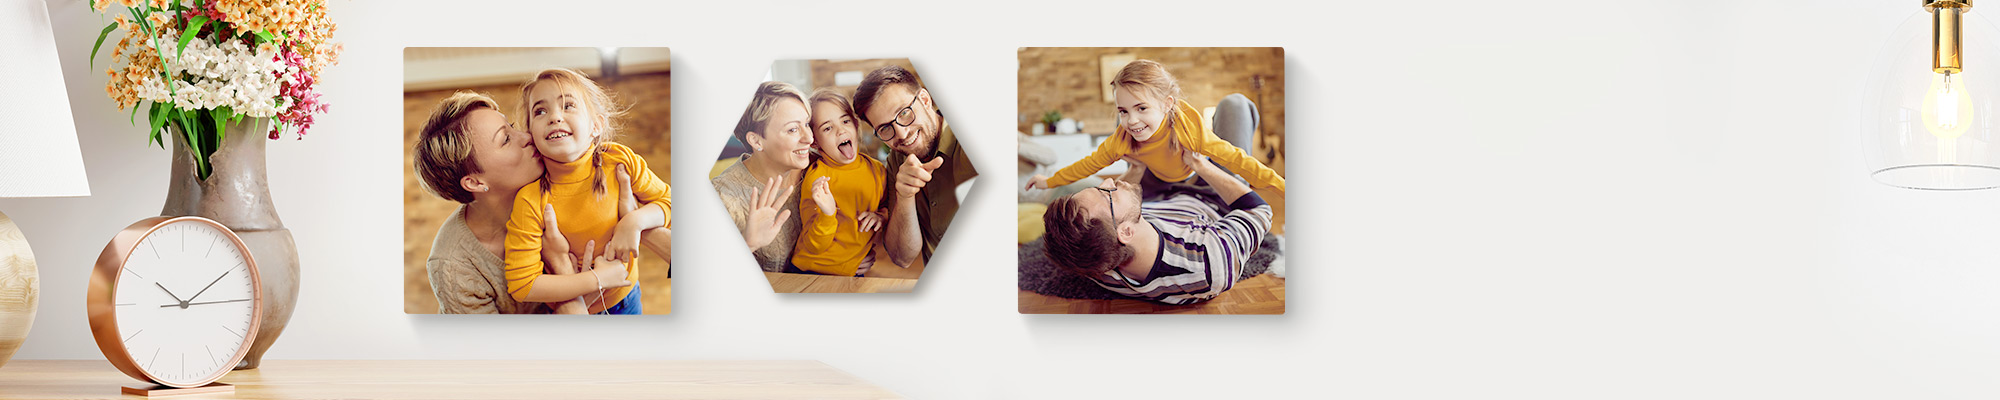 Snapfish Photo Tiles featuring child portraits, family photos, and vacation photos displayed on wall above a sofa